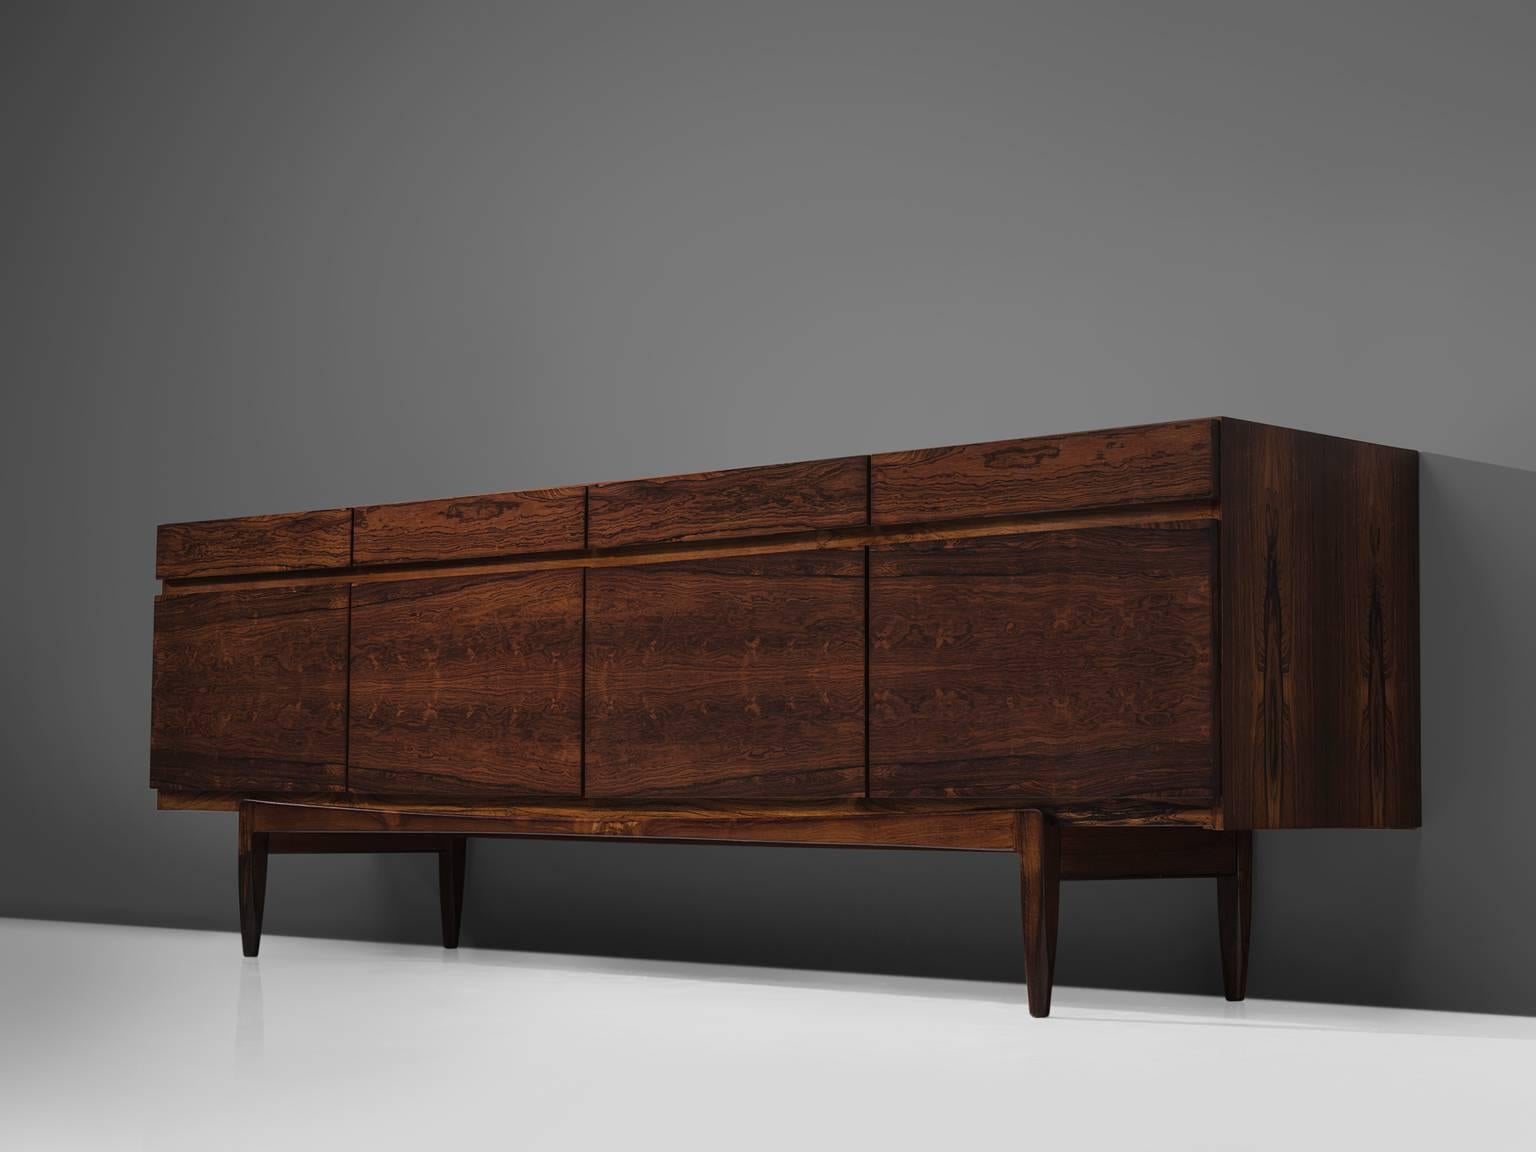 Ib Kofod-Larsen for Faarup, sideboard FA66, rosewood, Denmark, 1960s. 
 
This credenza by Kofod-Larsen shows delicate crafted details and incredible rosewood flames. The flames are bookmatched due to which a very organic yet graphic pattern is